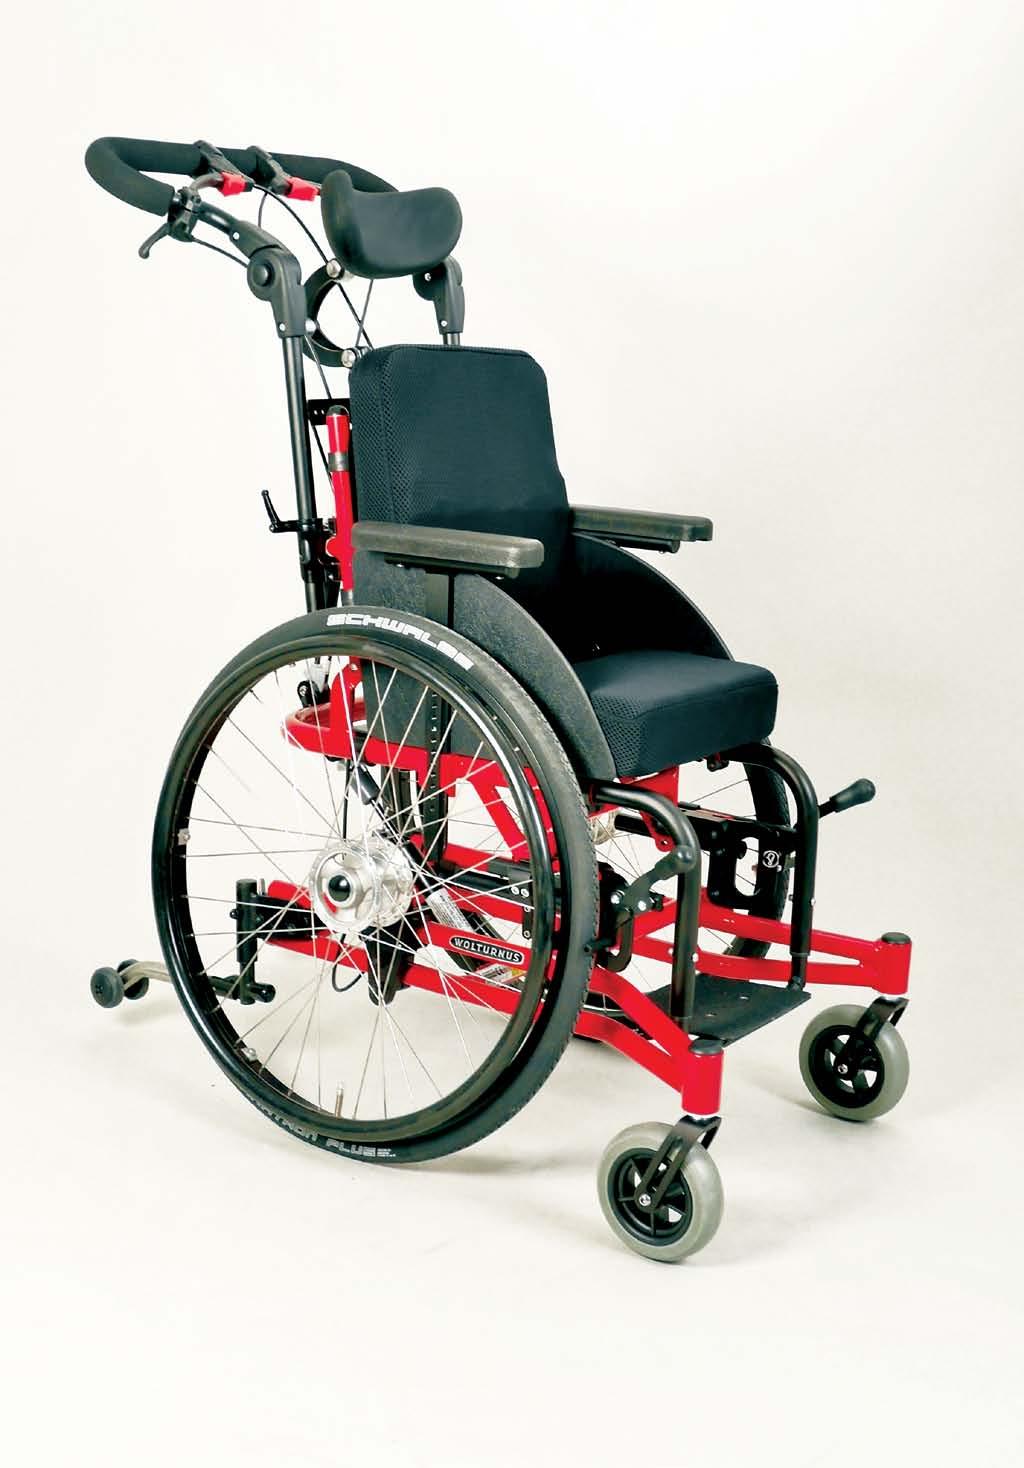 COMFORT WHEELCHAIR A-Run Comfort Narrow and easy to propel A-Run Comfort is a multi-adjustable wheelchair.